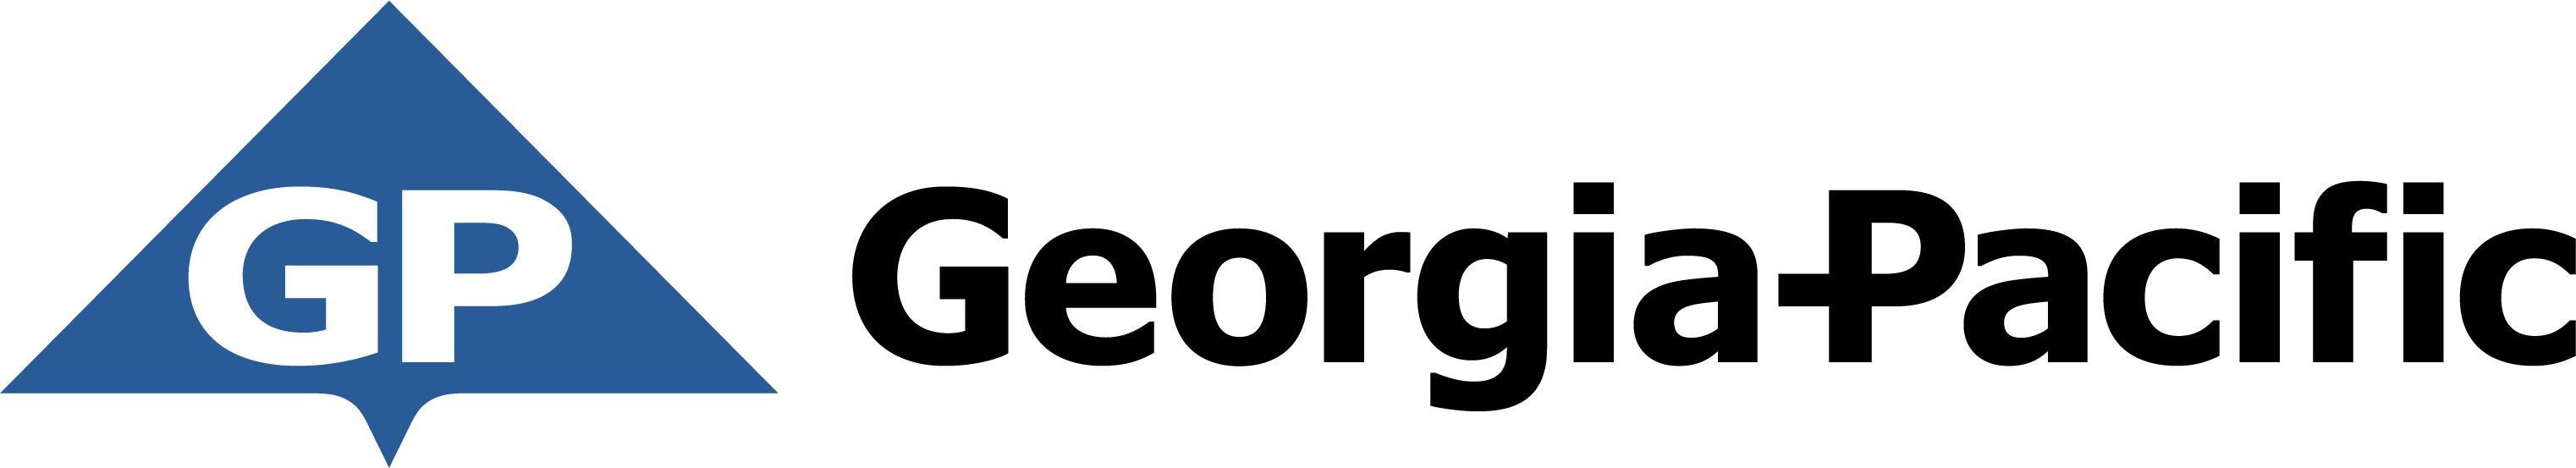 Georgia Red and Blue Business Logo - Welcome to Georgia-Pacific